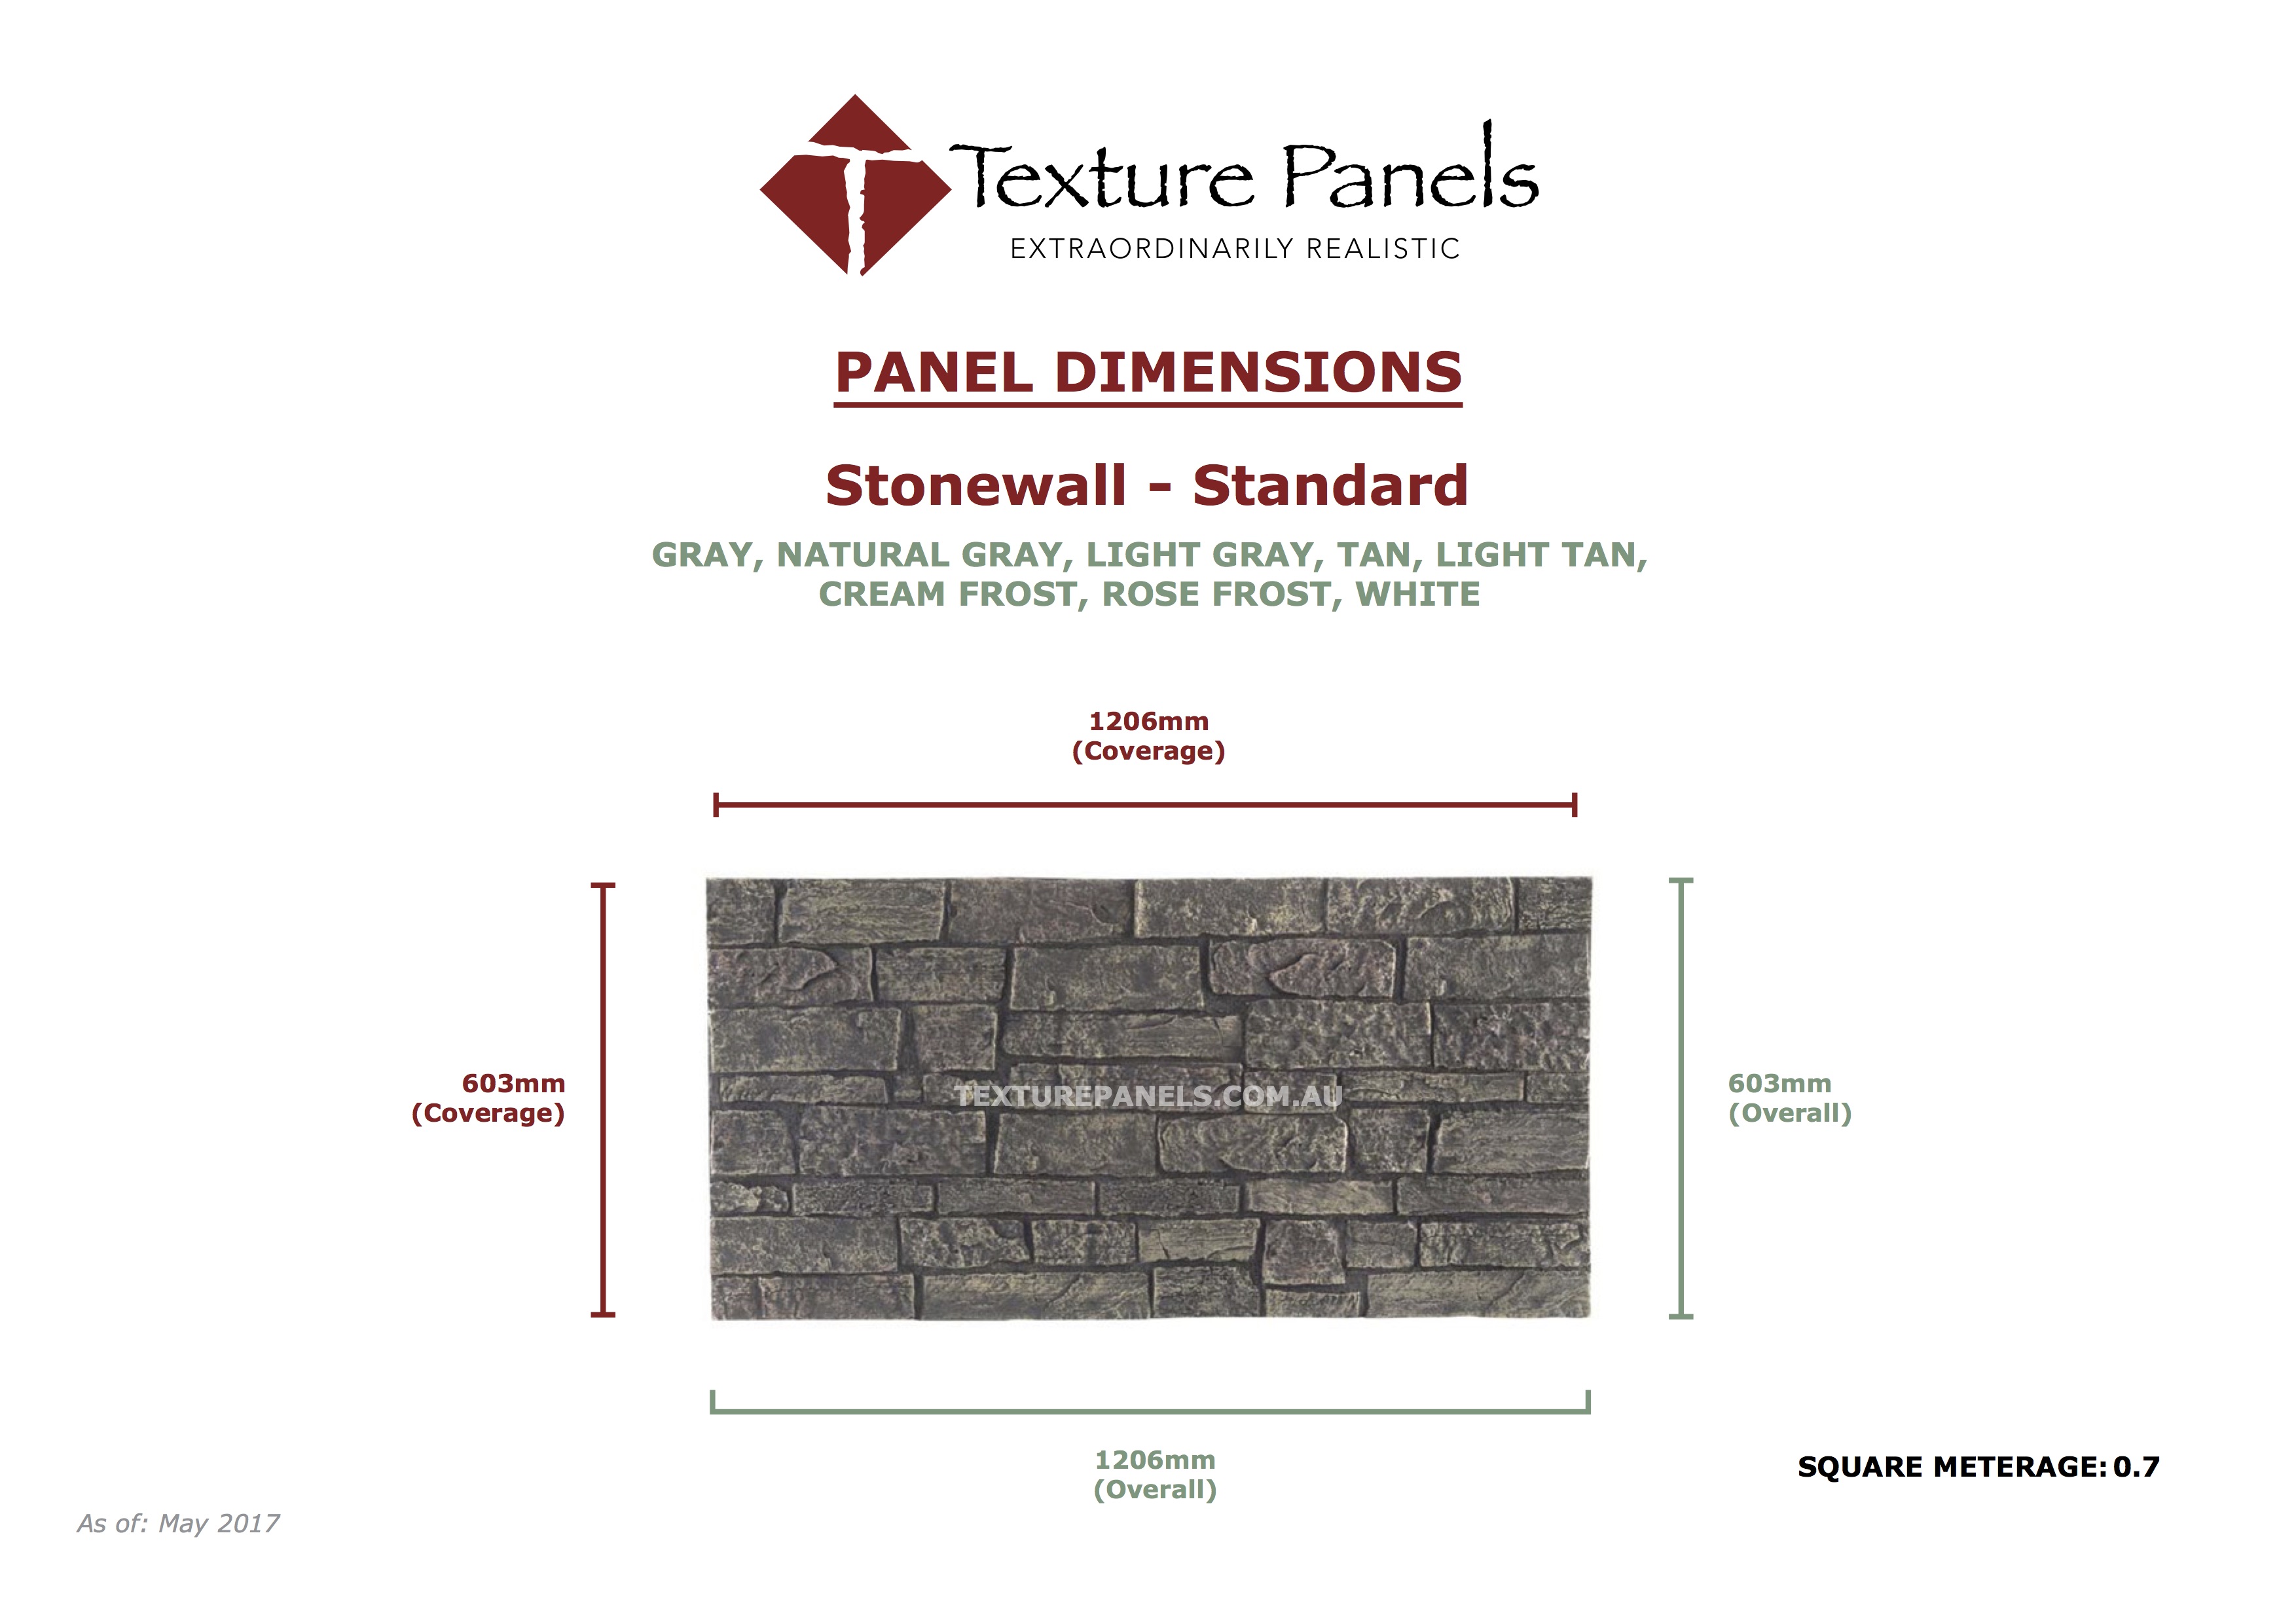 Stonewall Faux Wall Panels Rose Frost Dimensions